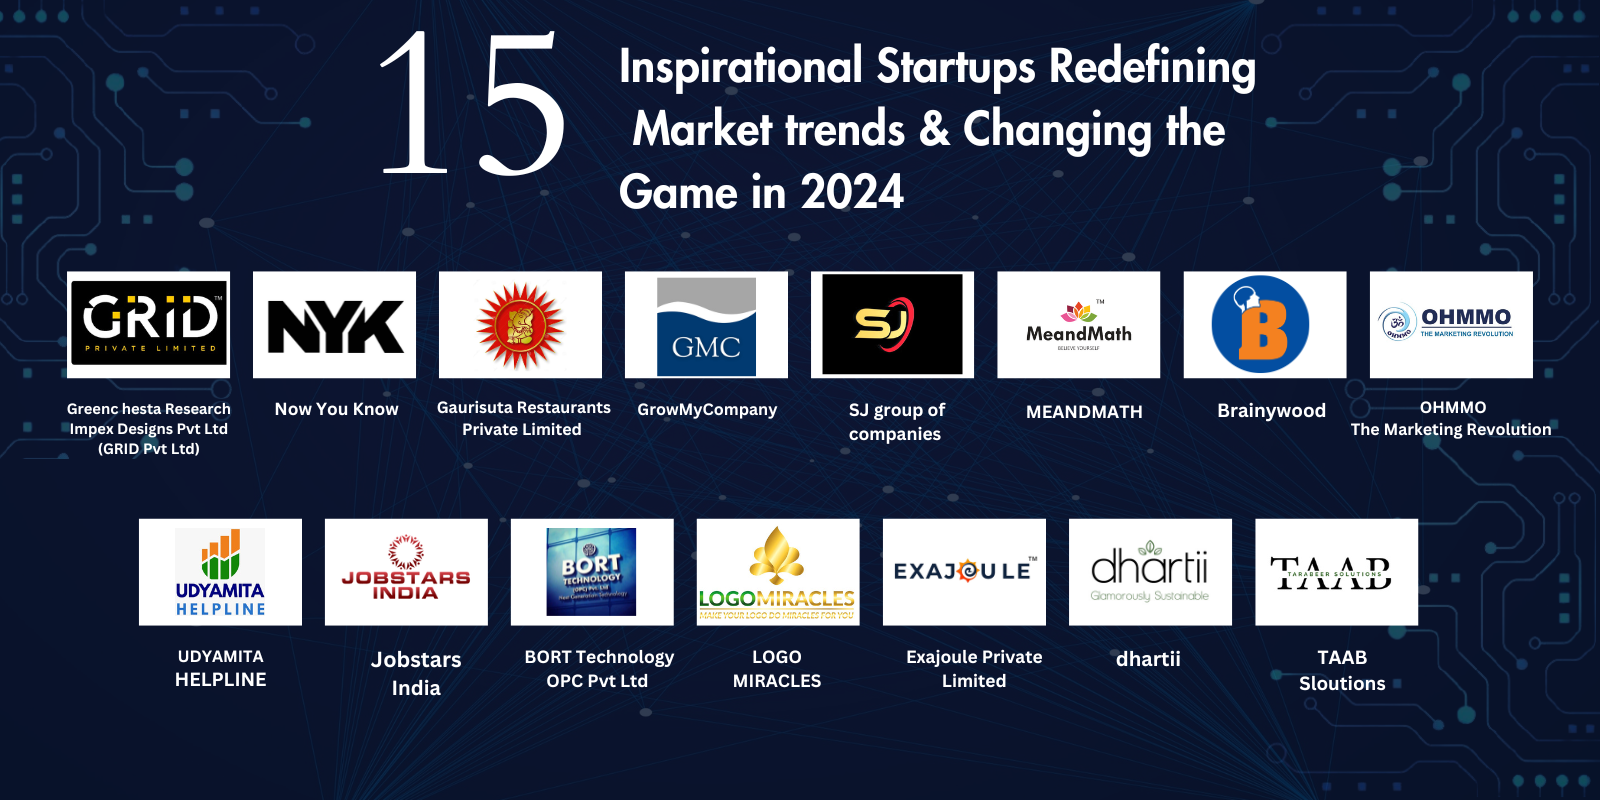 15 Inspirational Startups Redefining Market trends & Changing the Game in 2024